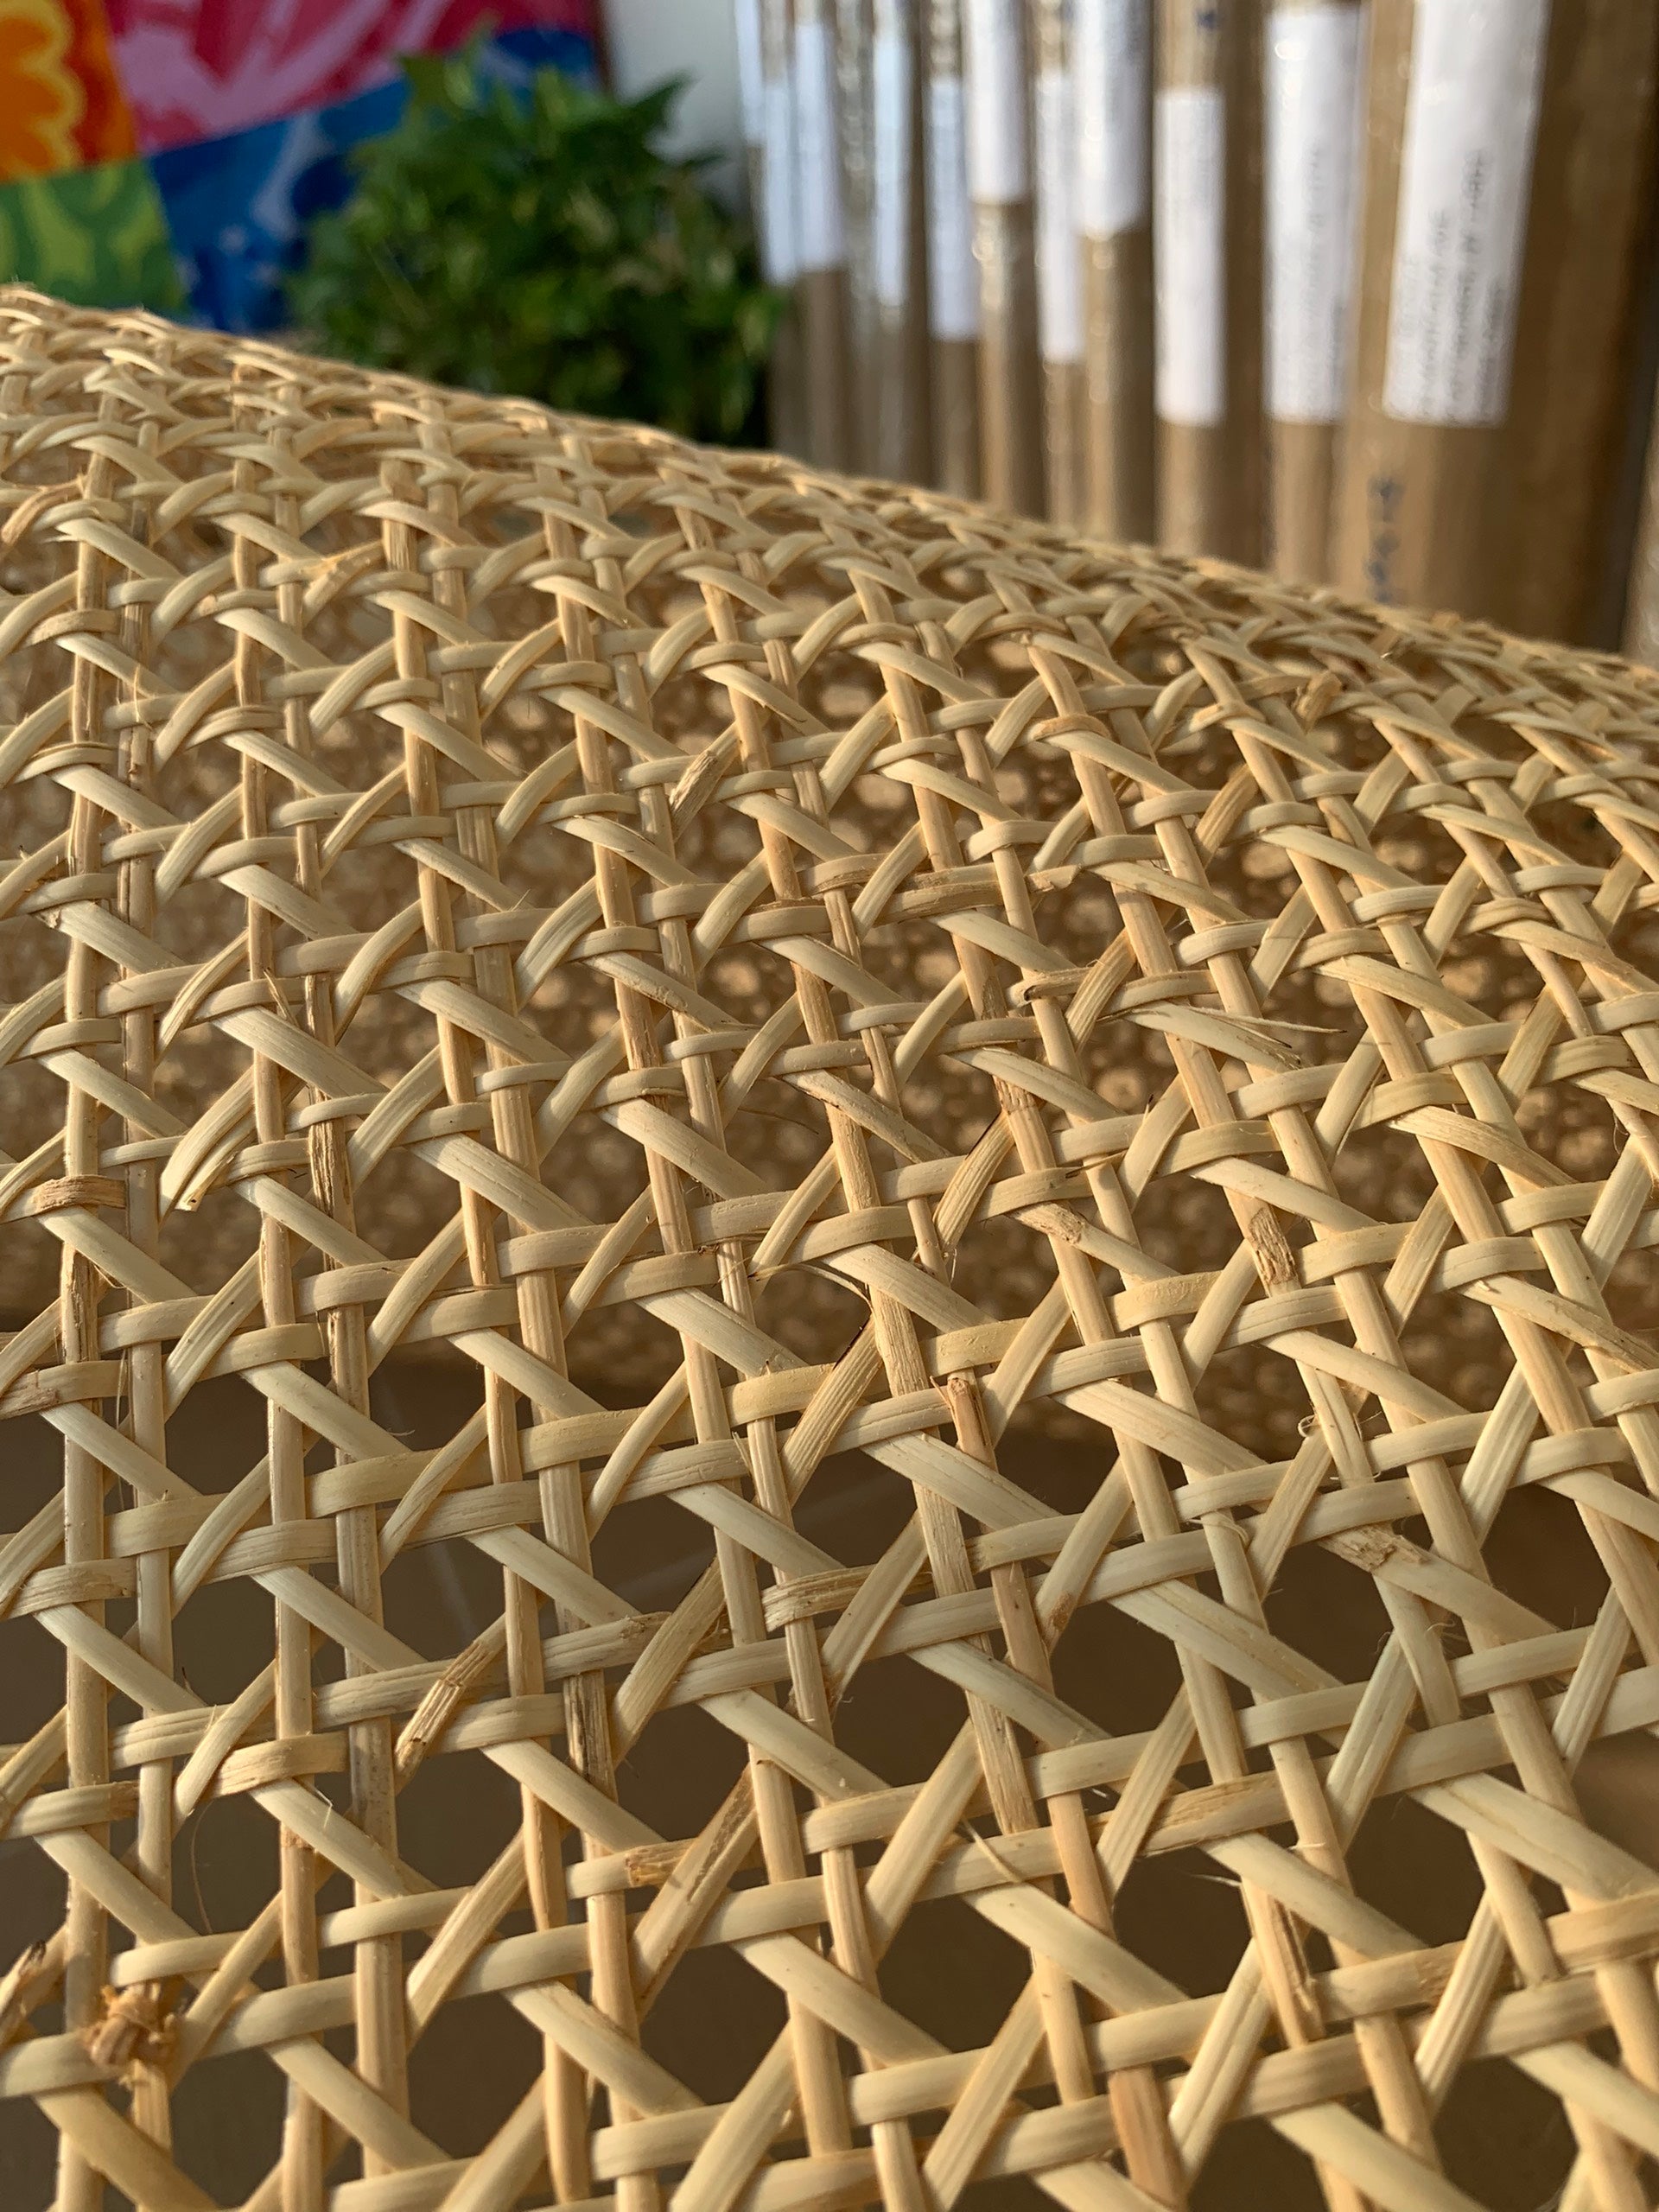 24 Width Rattan Cane Webbing Roll 5 Feet Hexagon Weave Rattan Fabric Furniture Woven Rattan Sheets for Crafts Cane Weave Rattan Material Natural